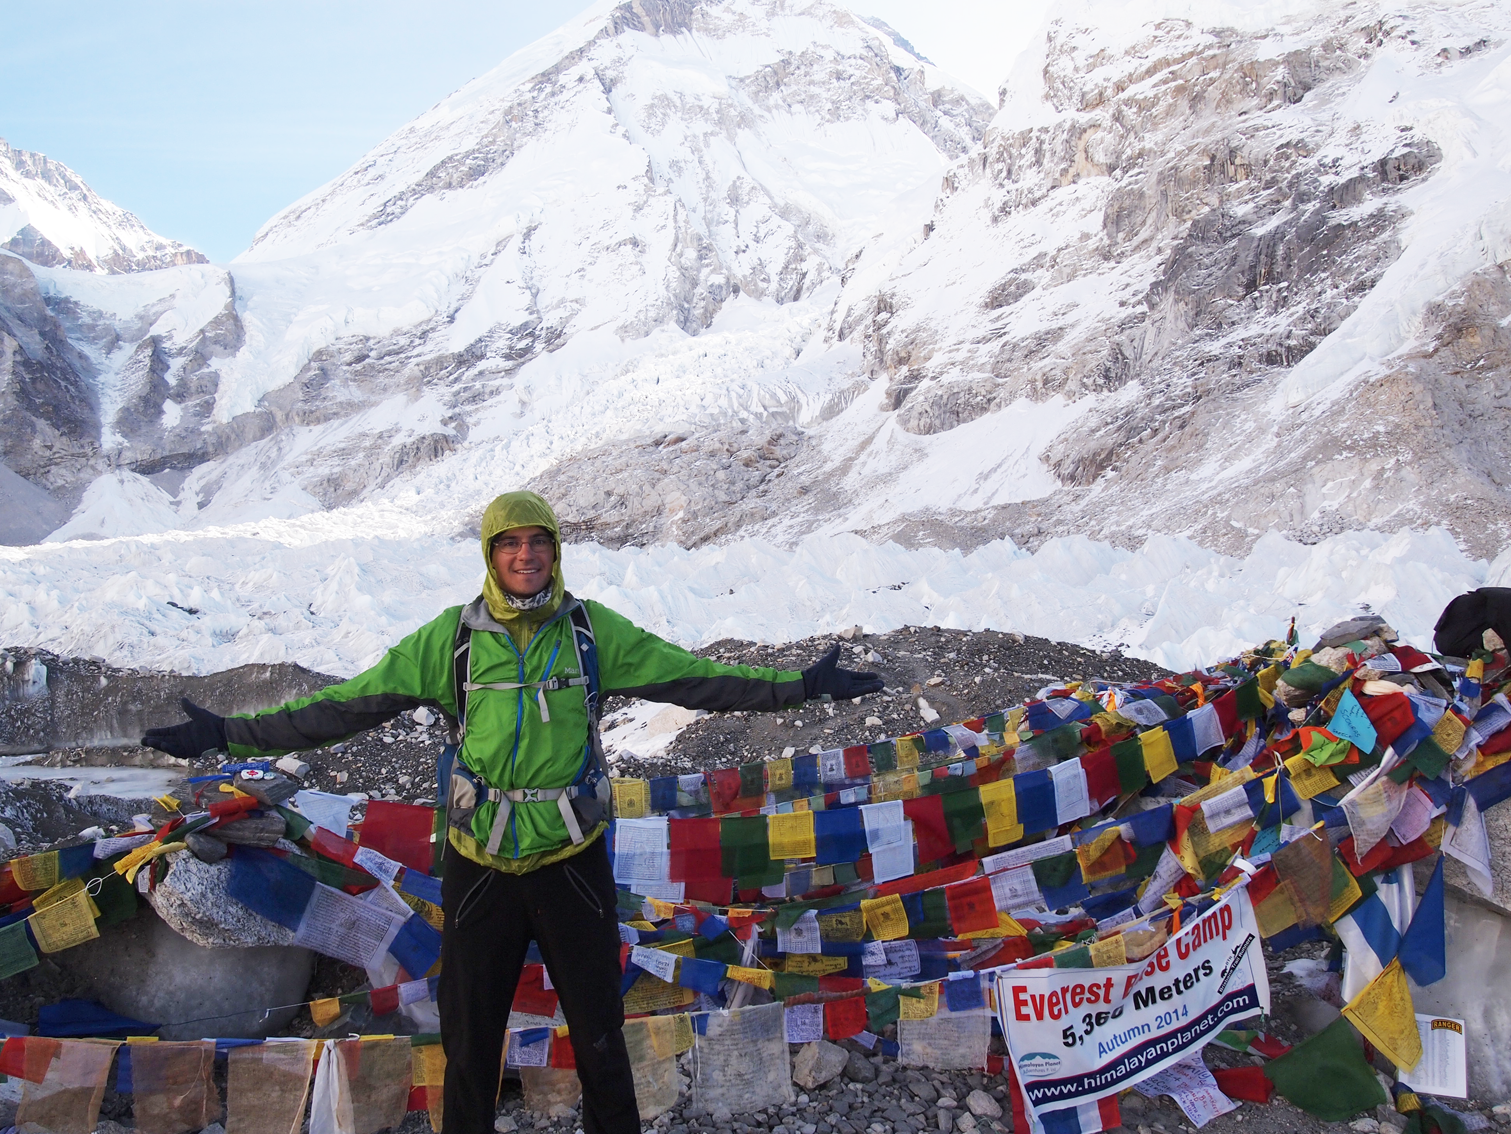 David Rounce at the Everest base camp